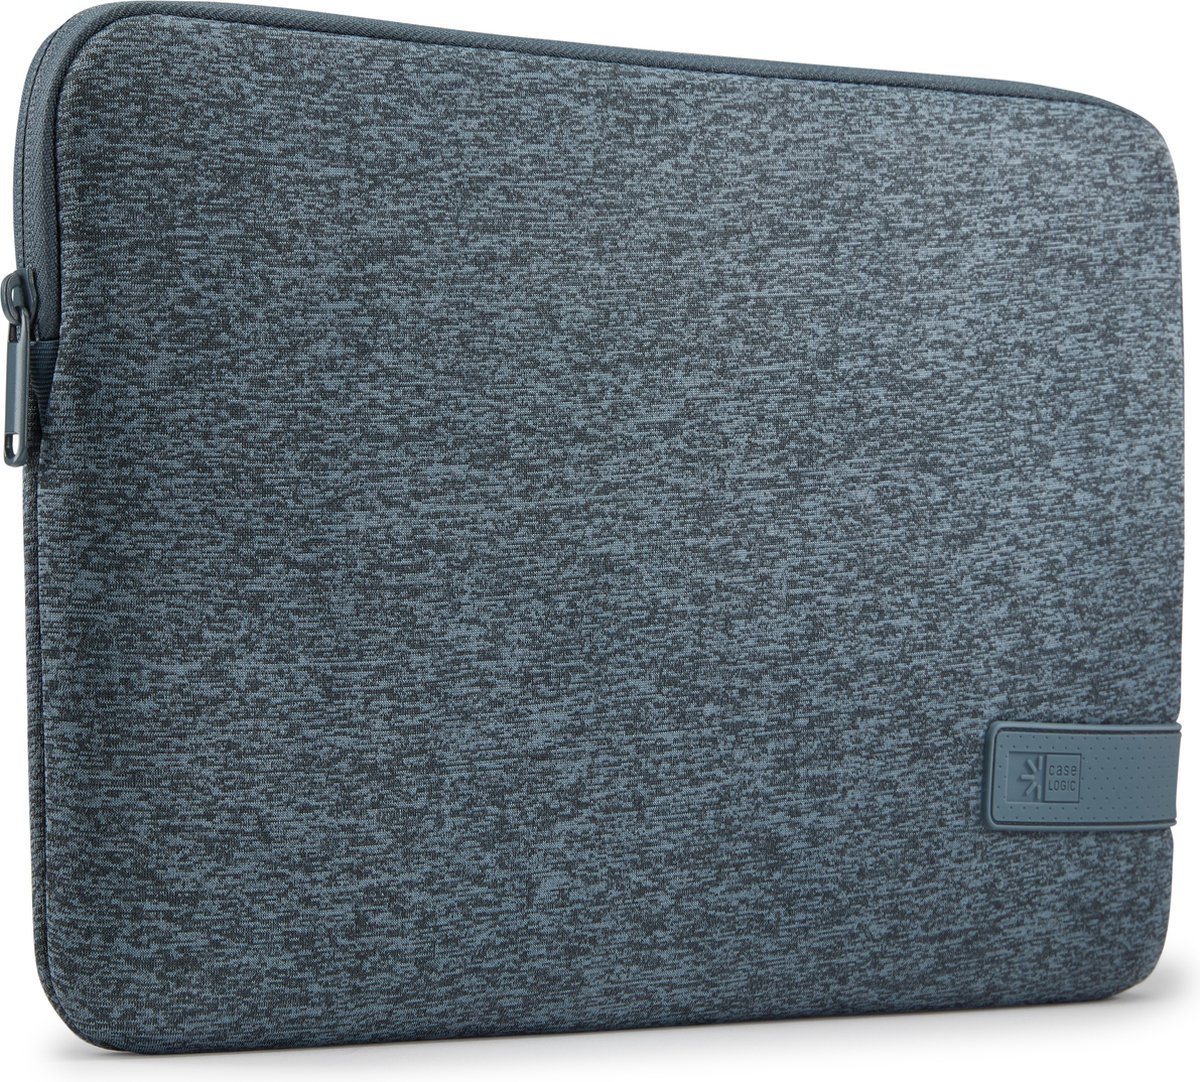 Case Logic REFMB113 - Laptophoes/ Sleeve - Macbook - 13 inch - Stormy Weather